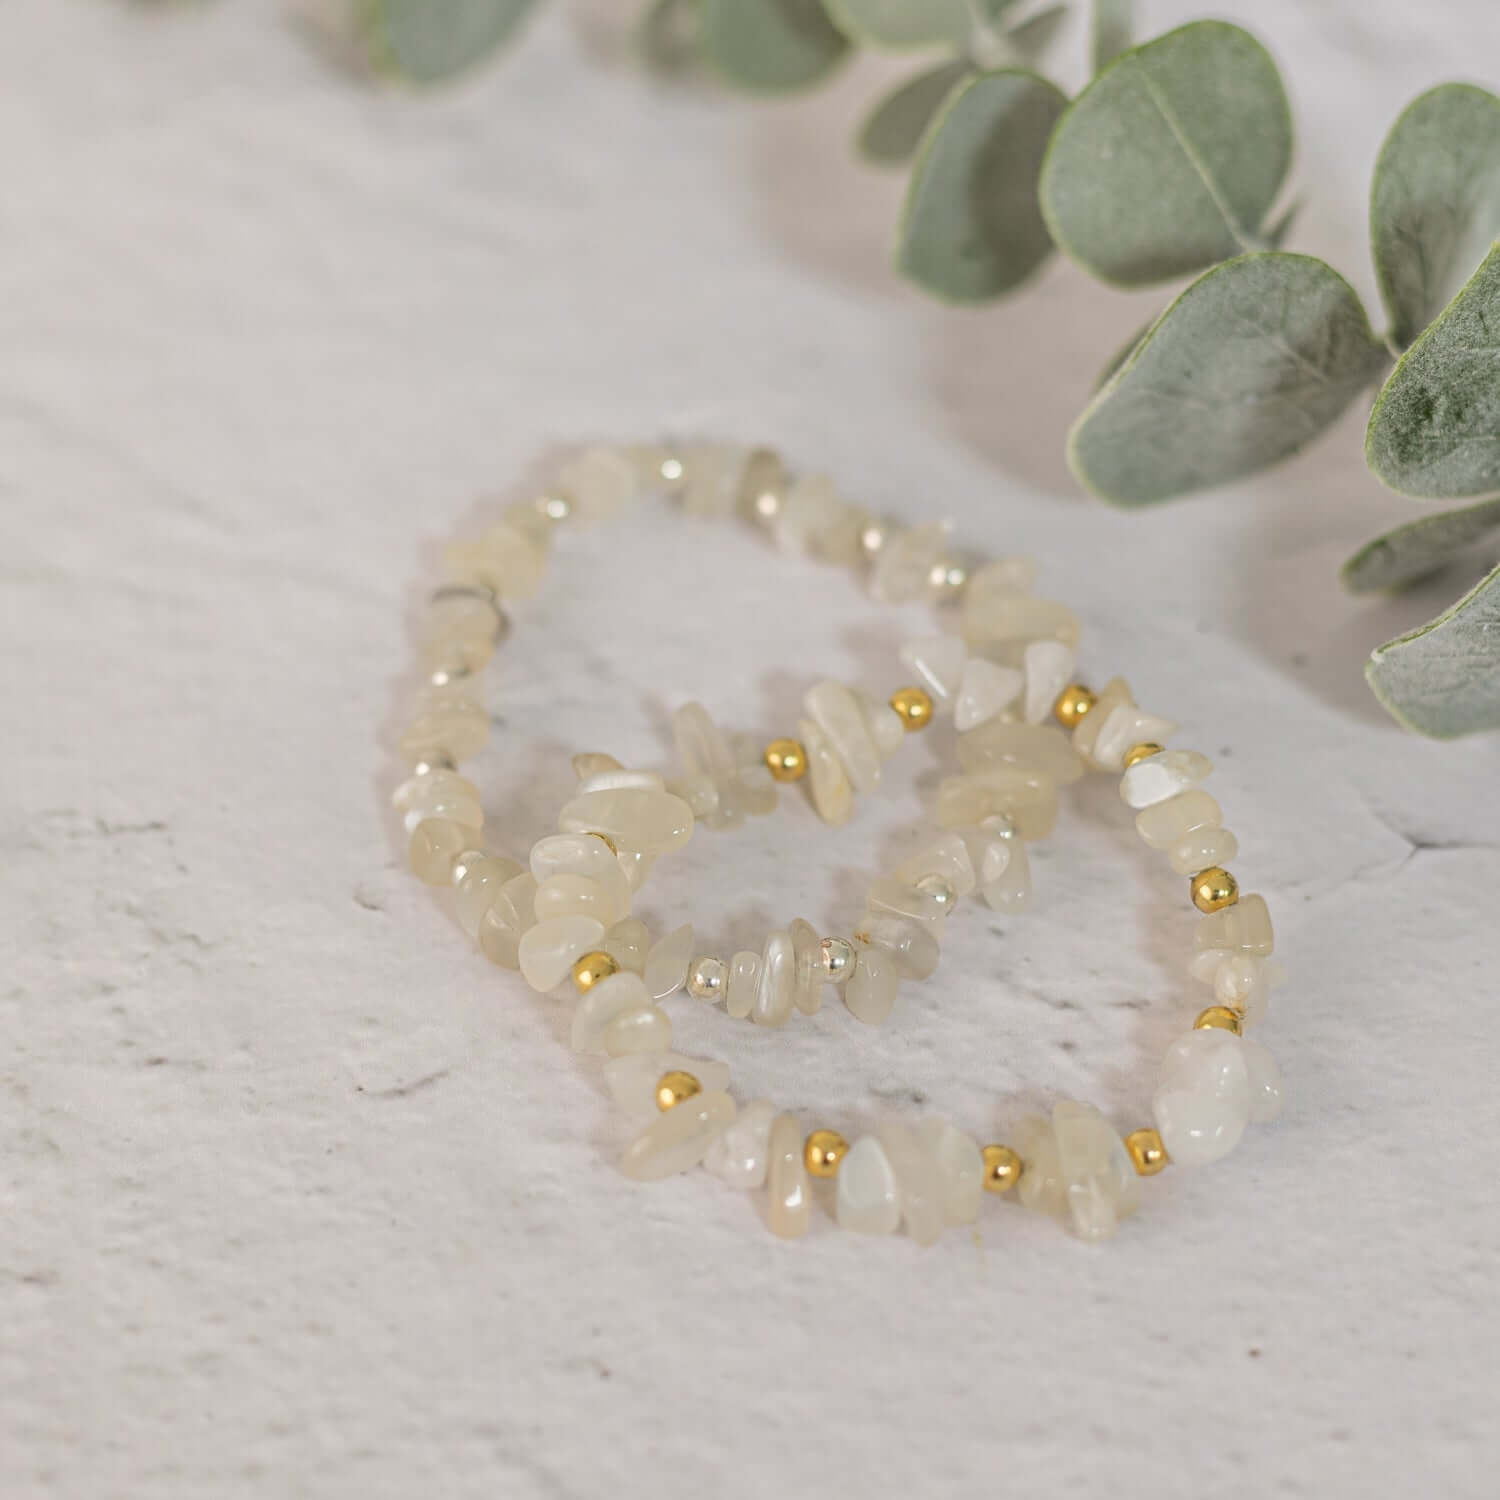 A close-up of two beaded bracelets featuring light-colored gemstones showcasing elegant birthstone jewellery for June. Placed on a light surface with eucalyptus leaves in the background, the bracelets are arranged in a slightly overlapping fashion.